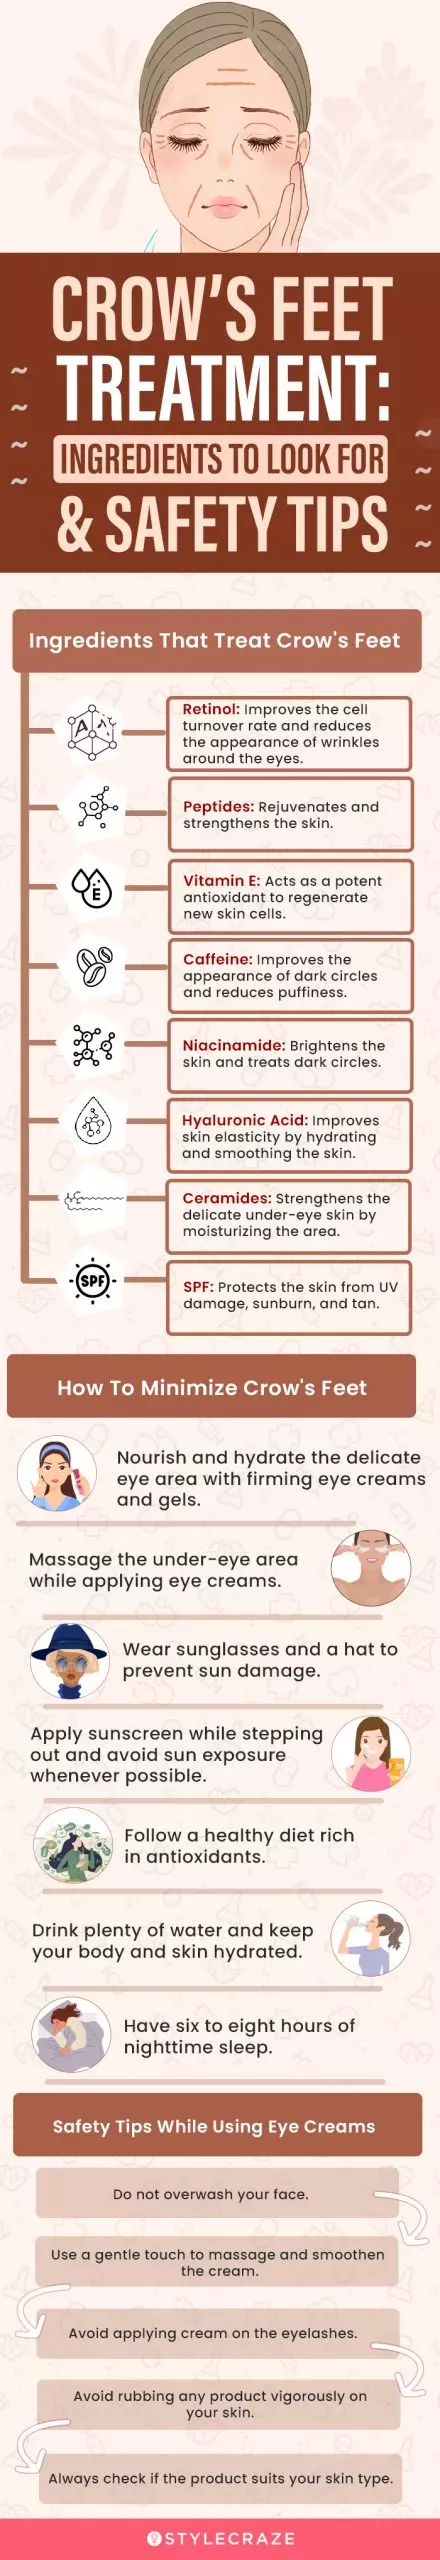 Crow’s Feet Treatment: Ingredients To Look For & Safety Tips (infographic)